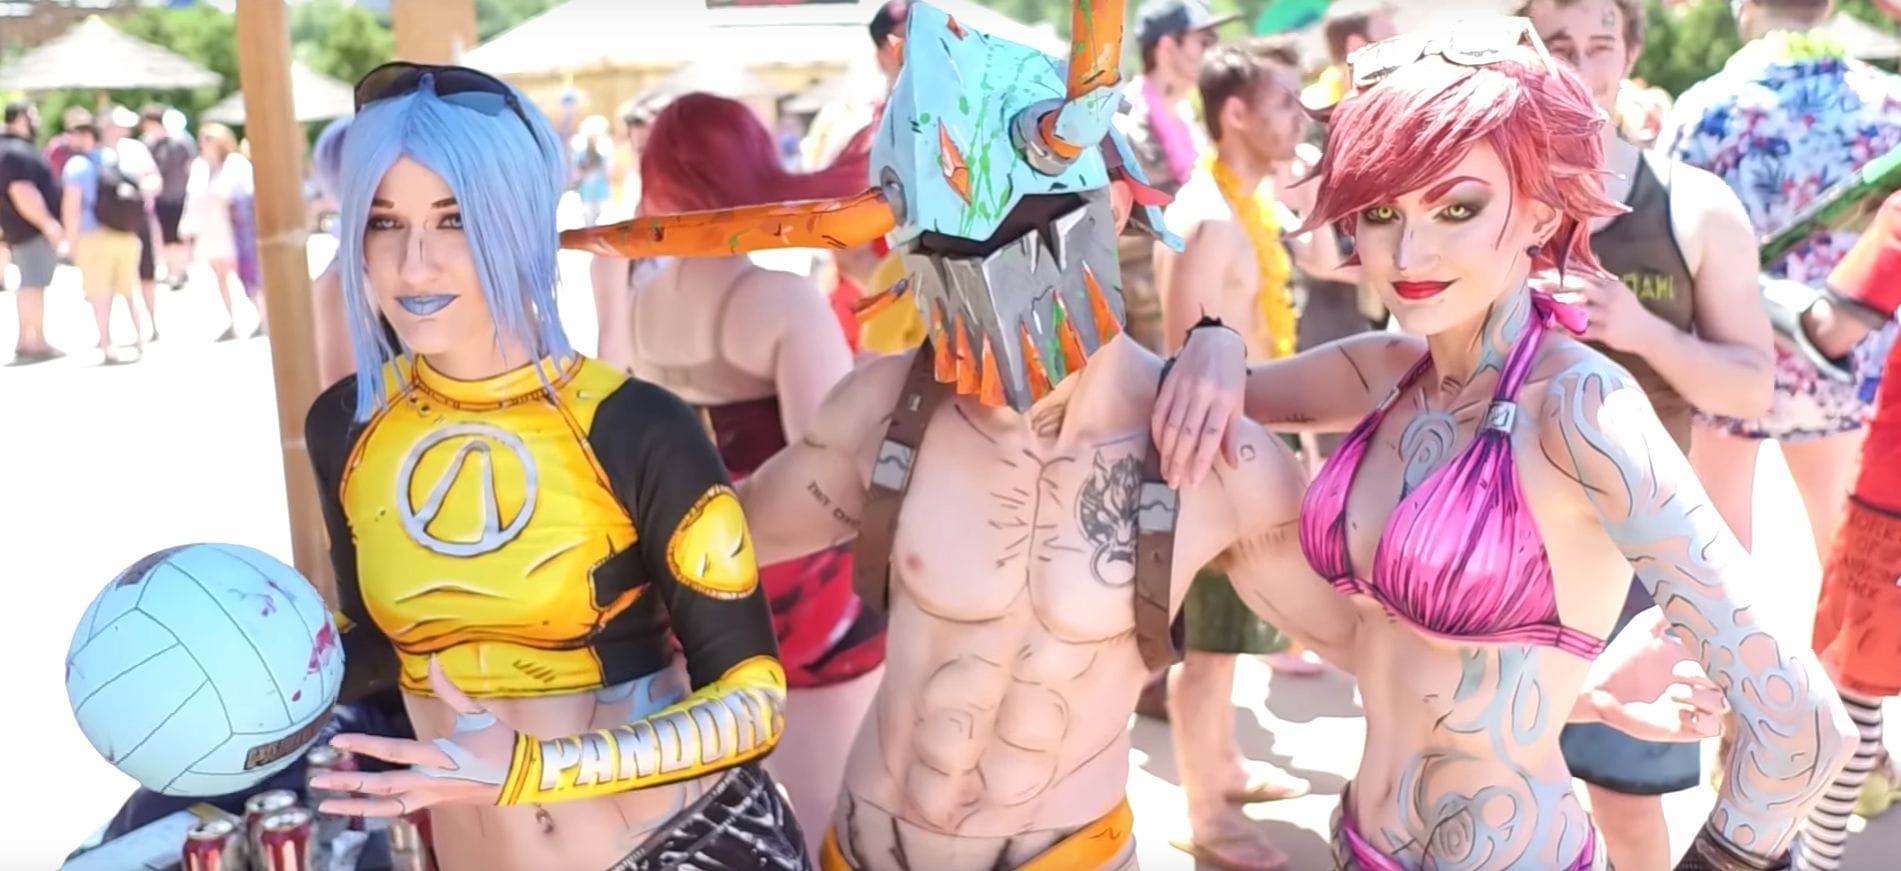 The cosplay pool party that is Colossalcon